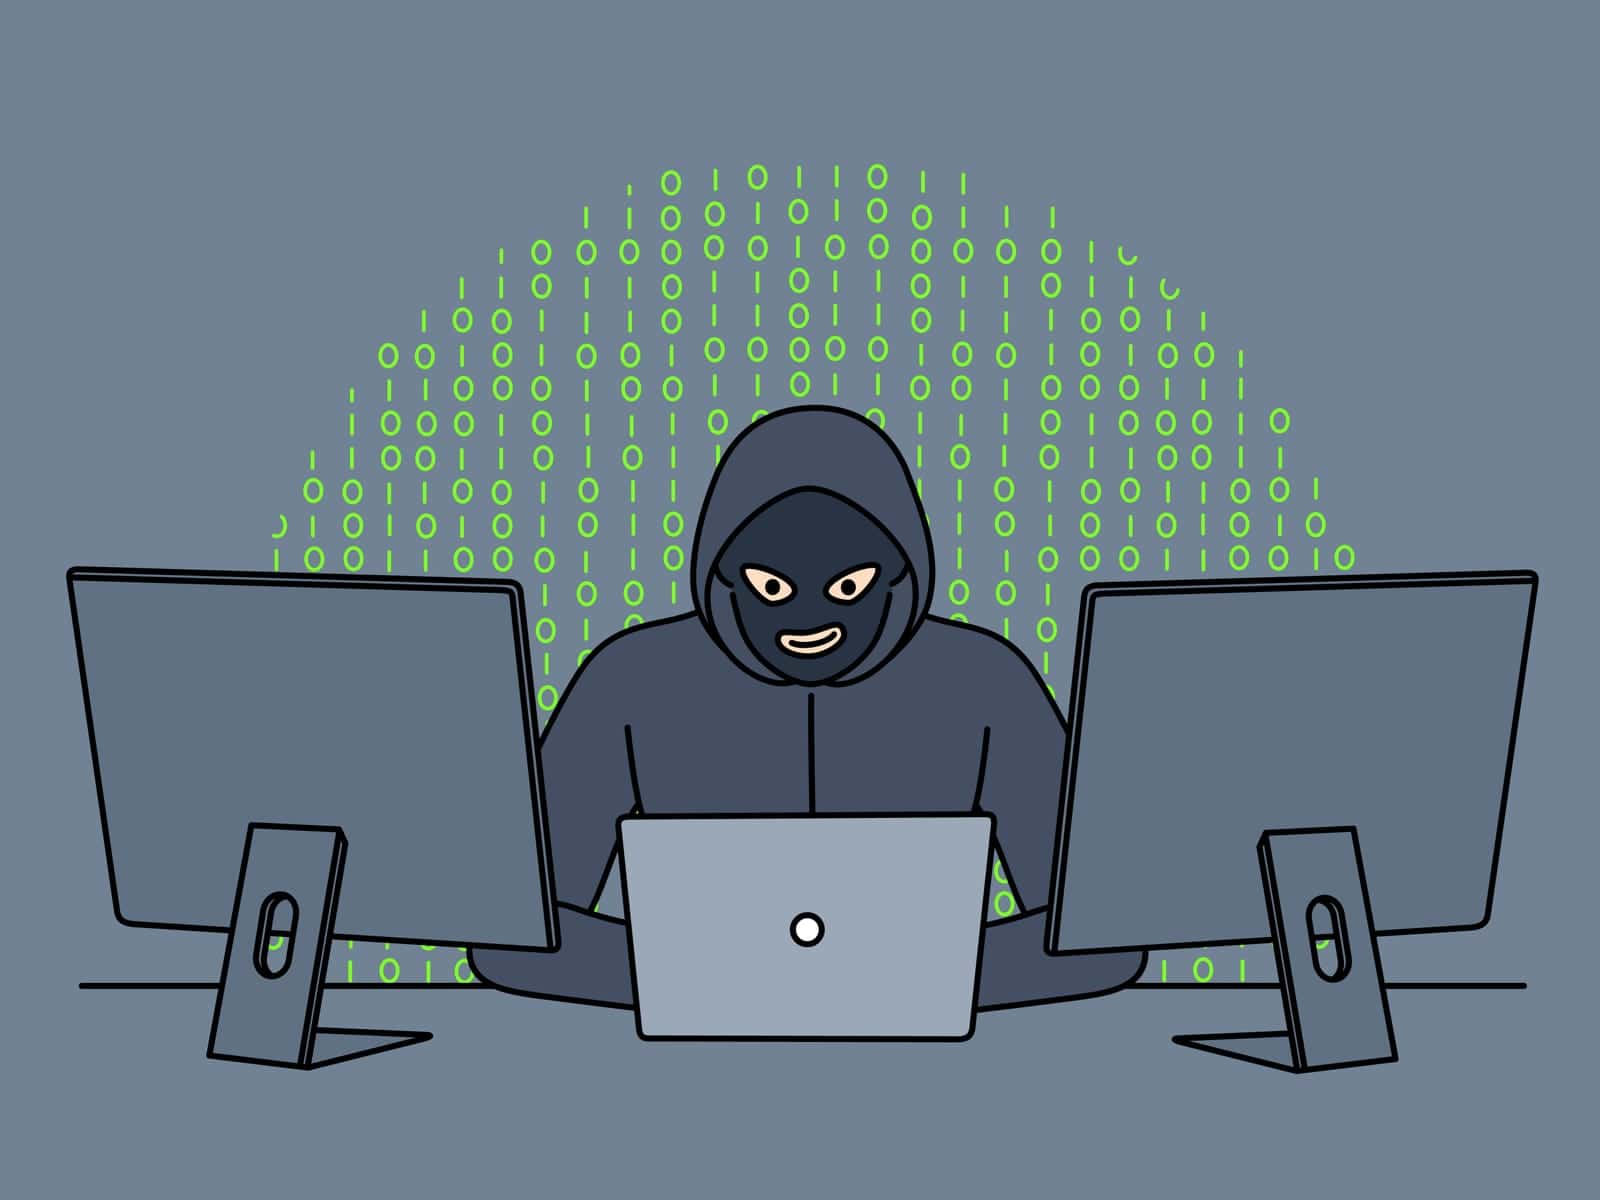 hacker-steal-information-from-computers